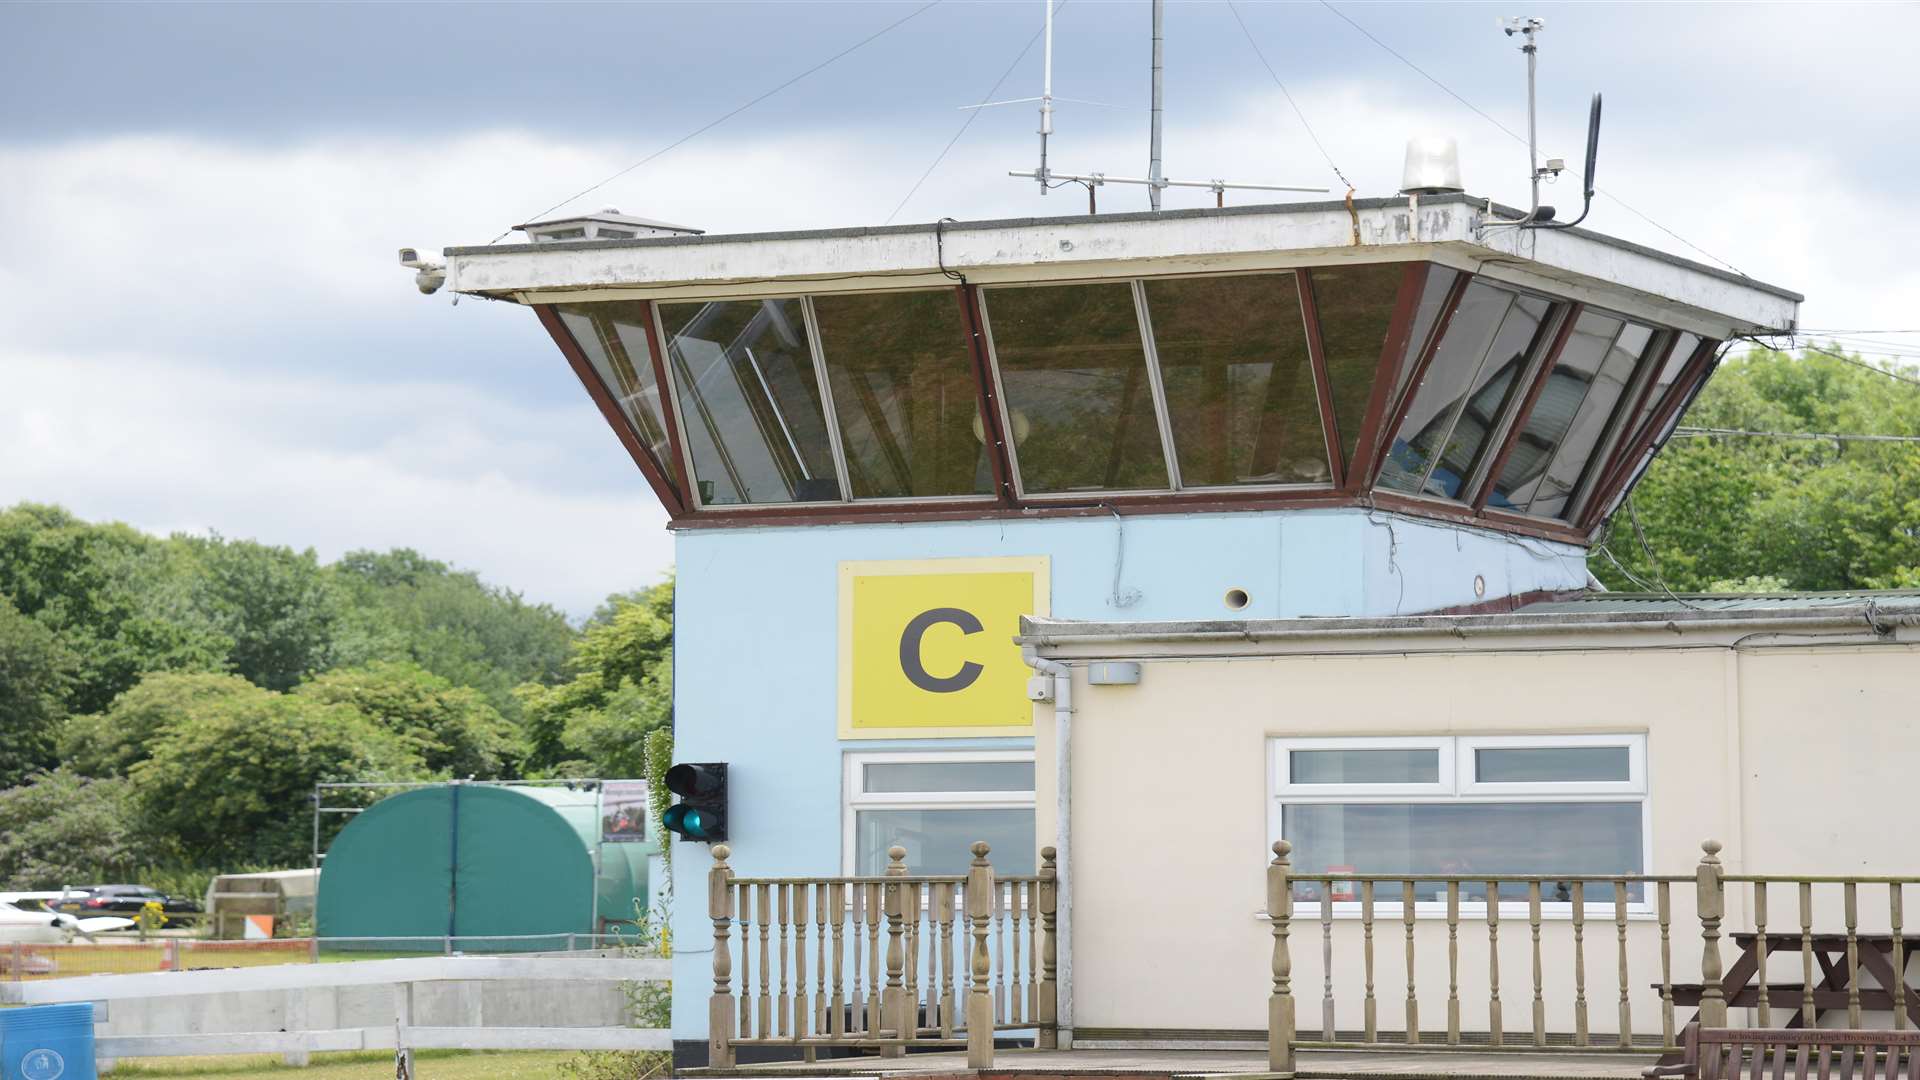 The control tower at Rochester Airport. Pic: Gary Browne